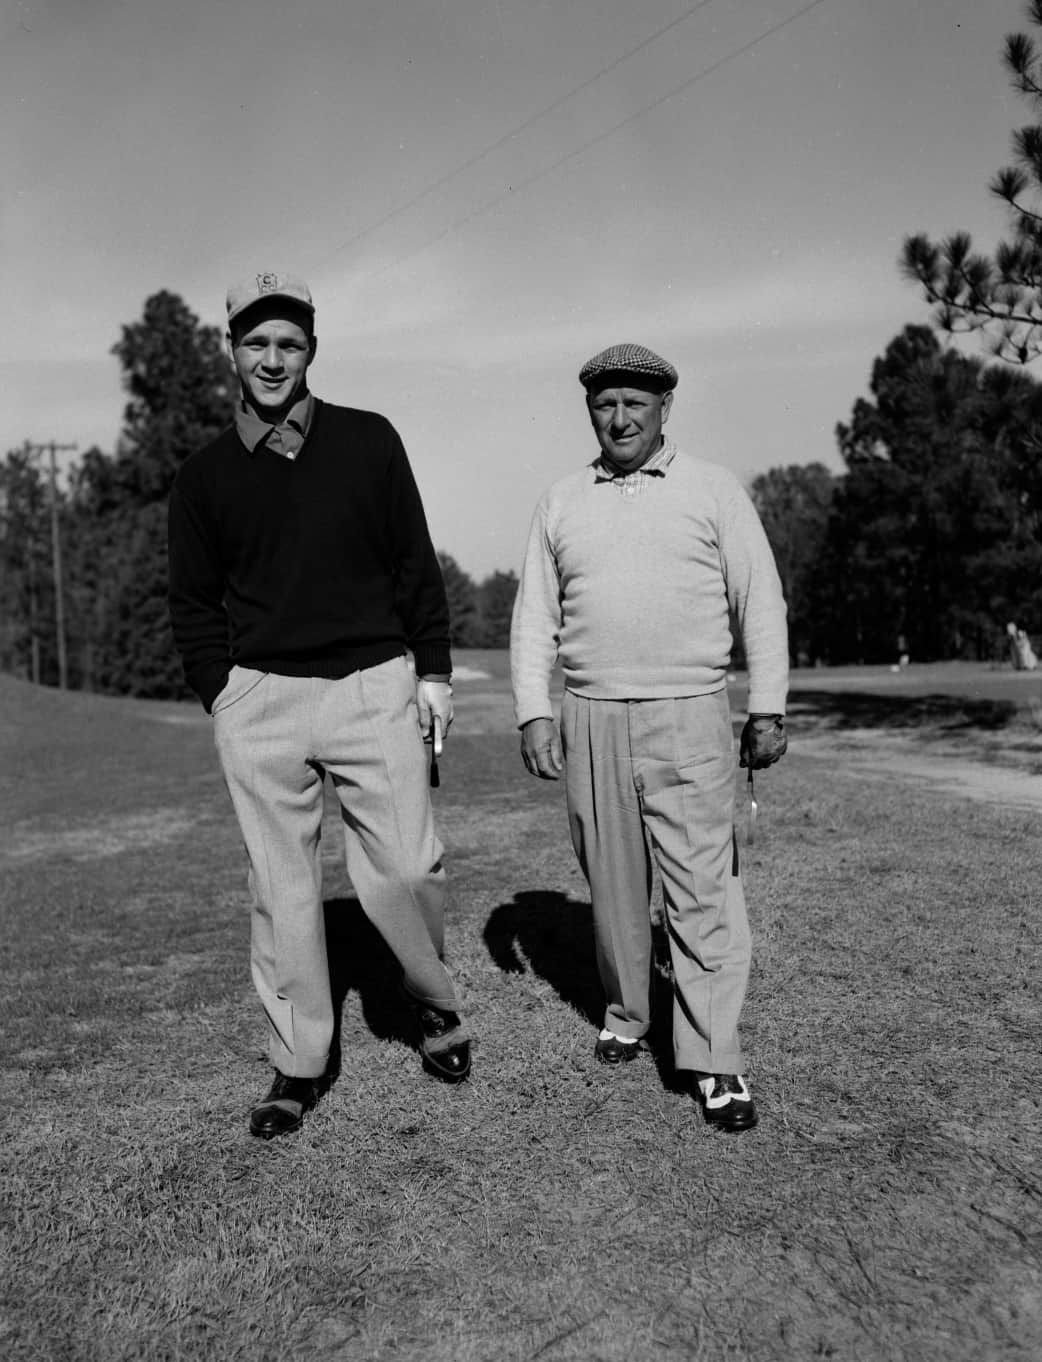 Arnold Palmer and his father Deacon on the 9th hole of Pinehurst No. 2 in 1954. (Photo Courtesy of the Tufts Archives)